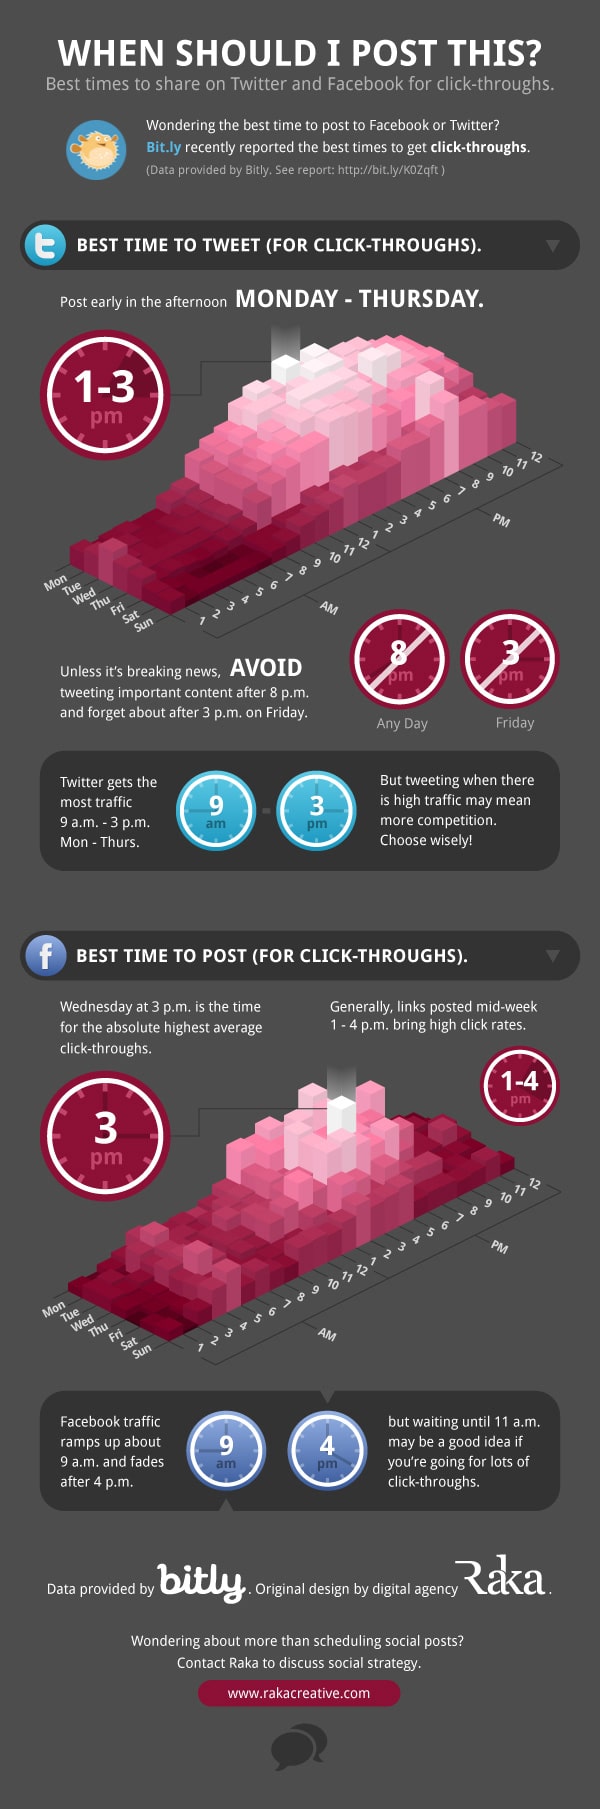 Best Time To Post On Twitter & Facebook [Infographic]